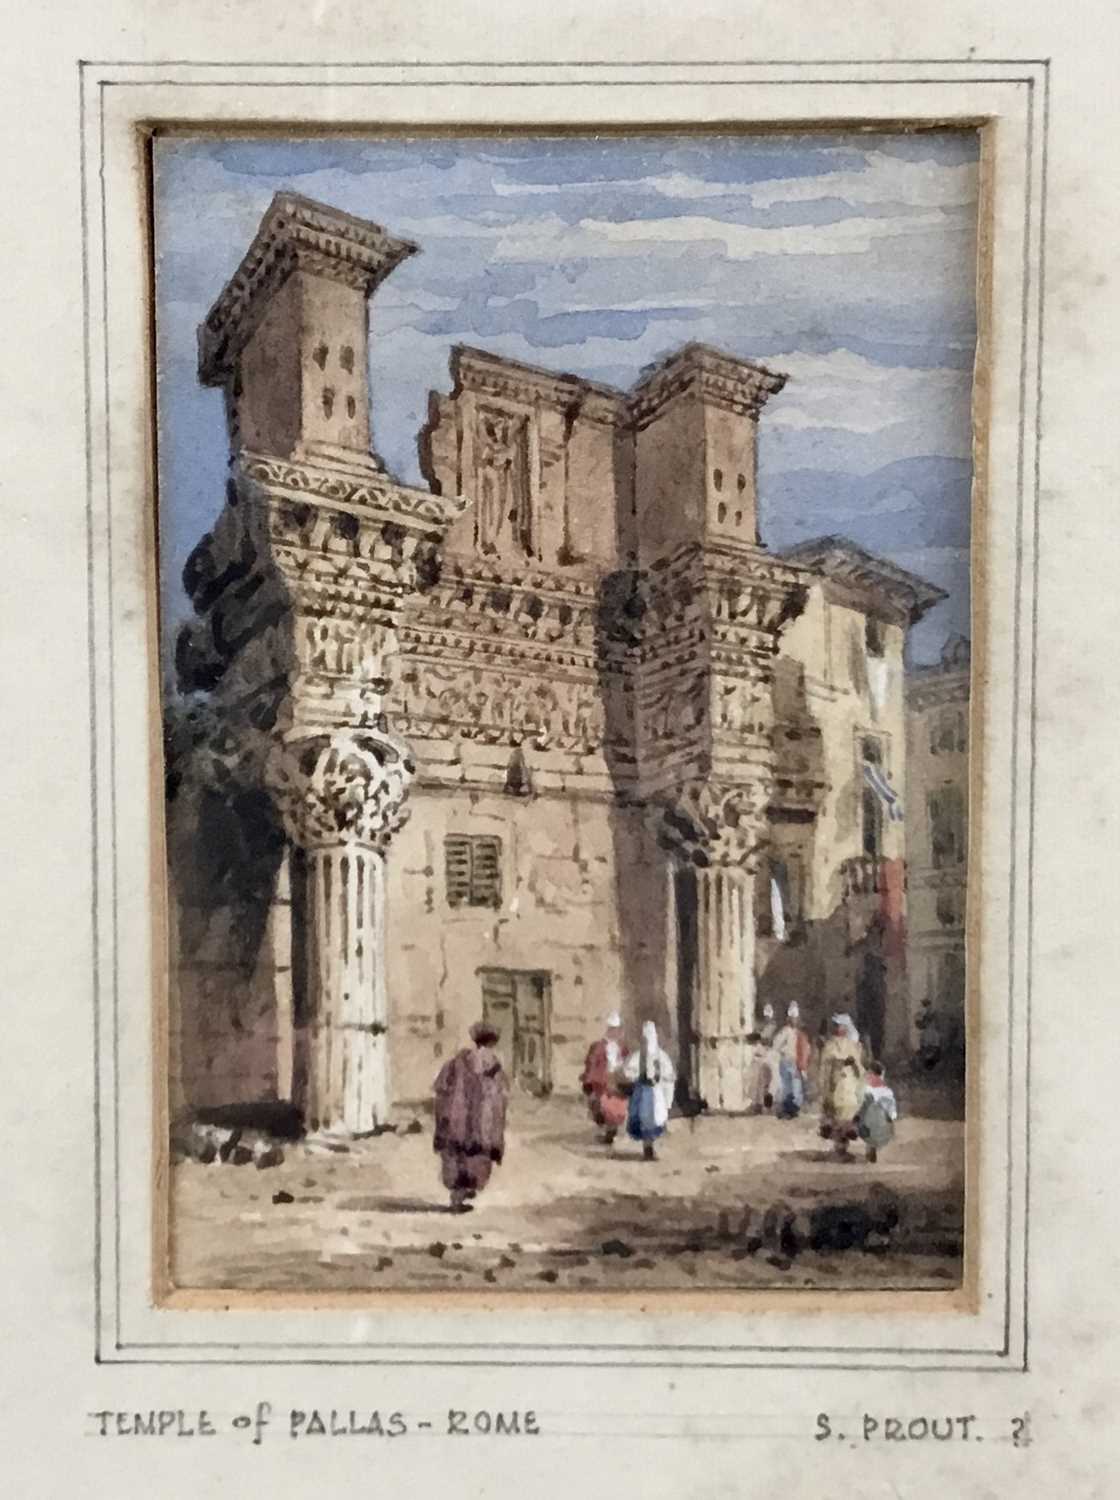 Lot 58 - Circle of Samuel Prout, 1783-1852. Watercolour, inscribed to mount “Temple of Pallas - Rome”. Framed and mounted. Overall including frame 27.5x22.5cm